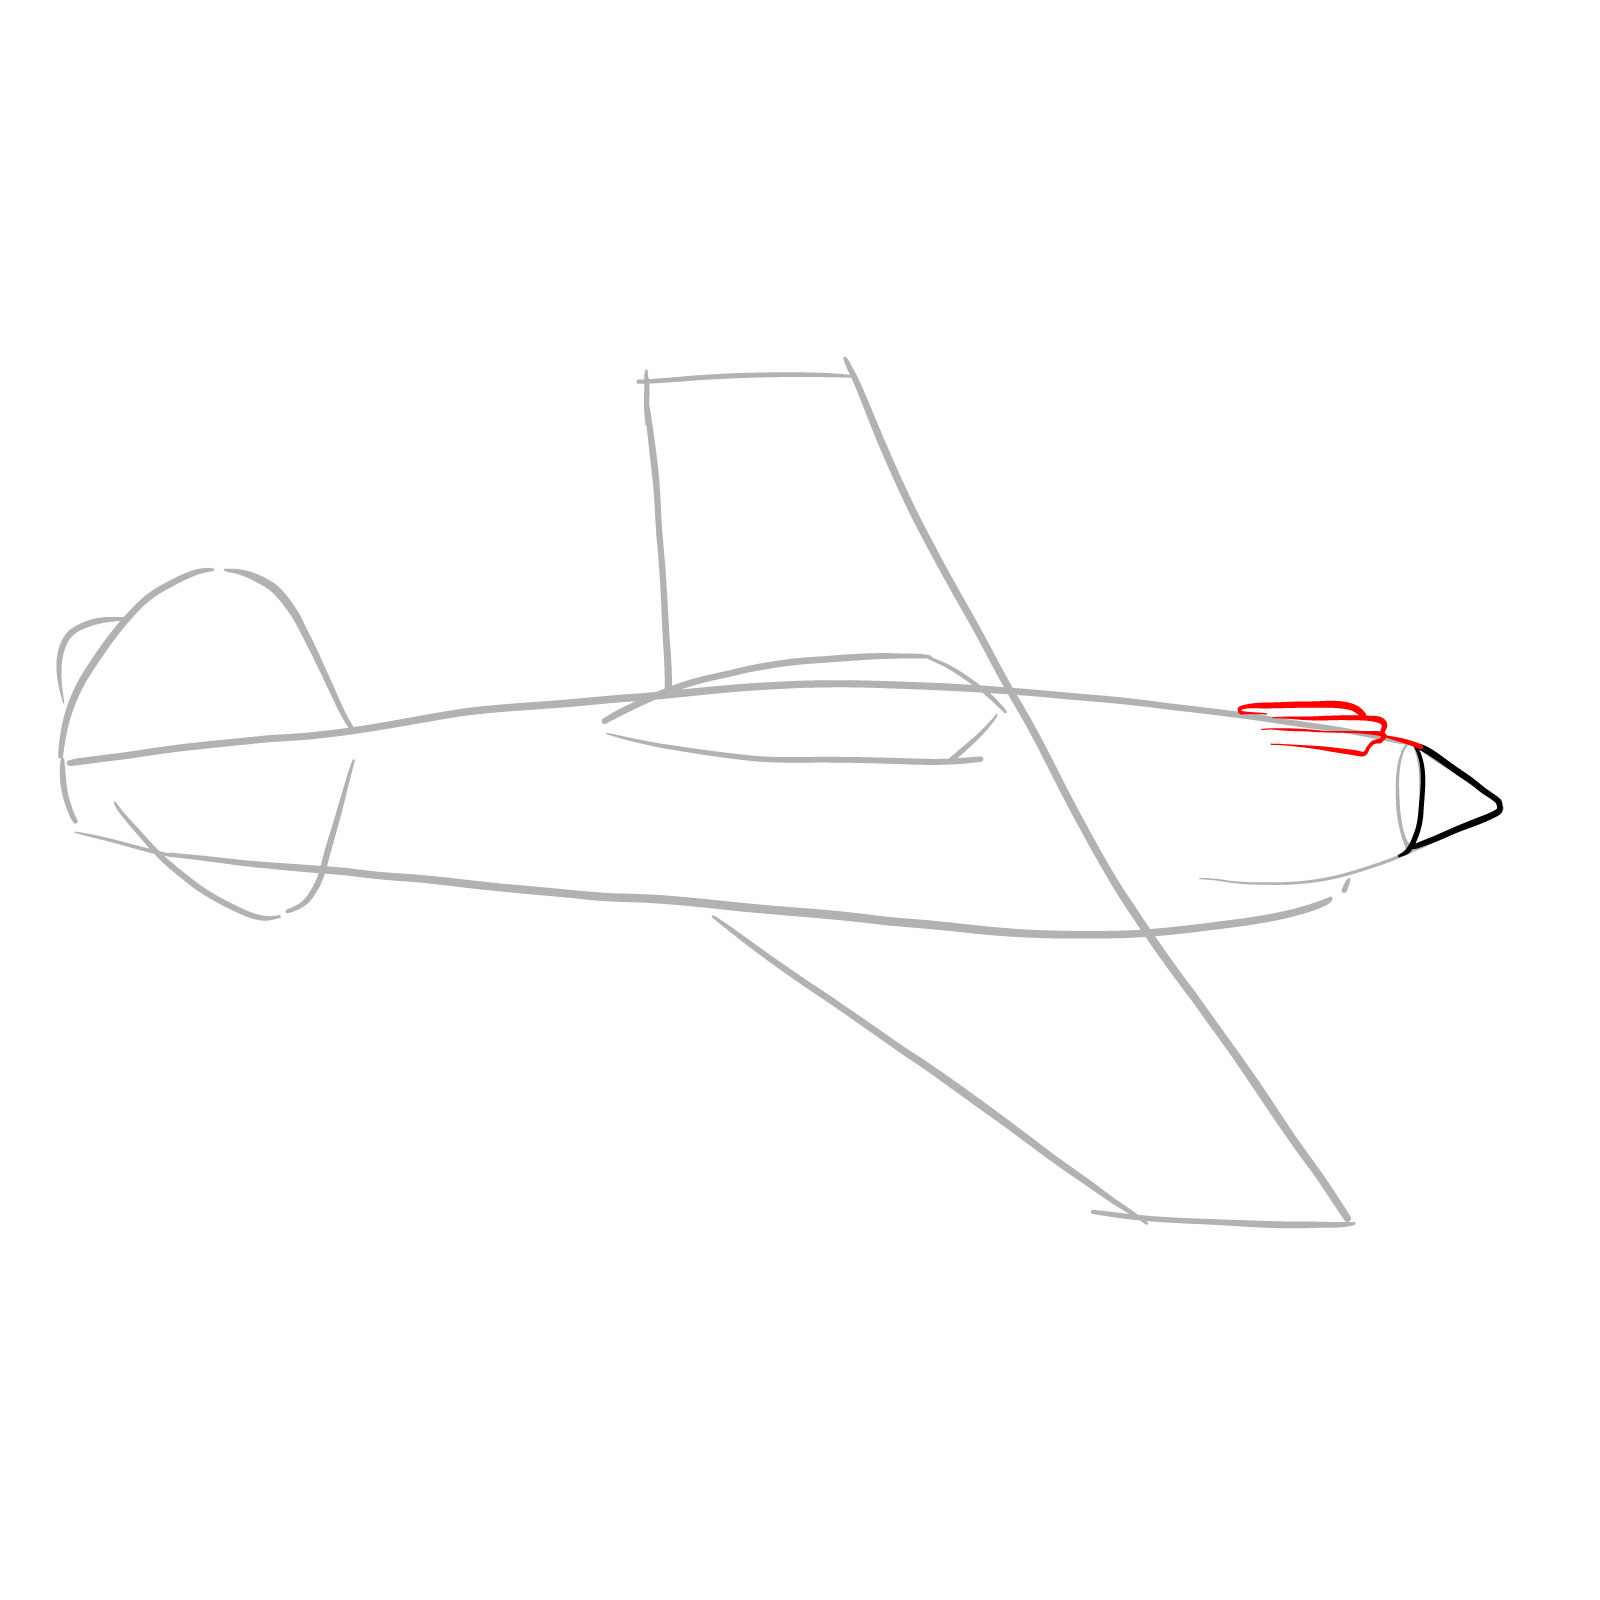 How to draw a P-40 Flying Tiger - step 05